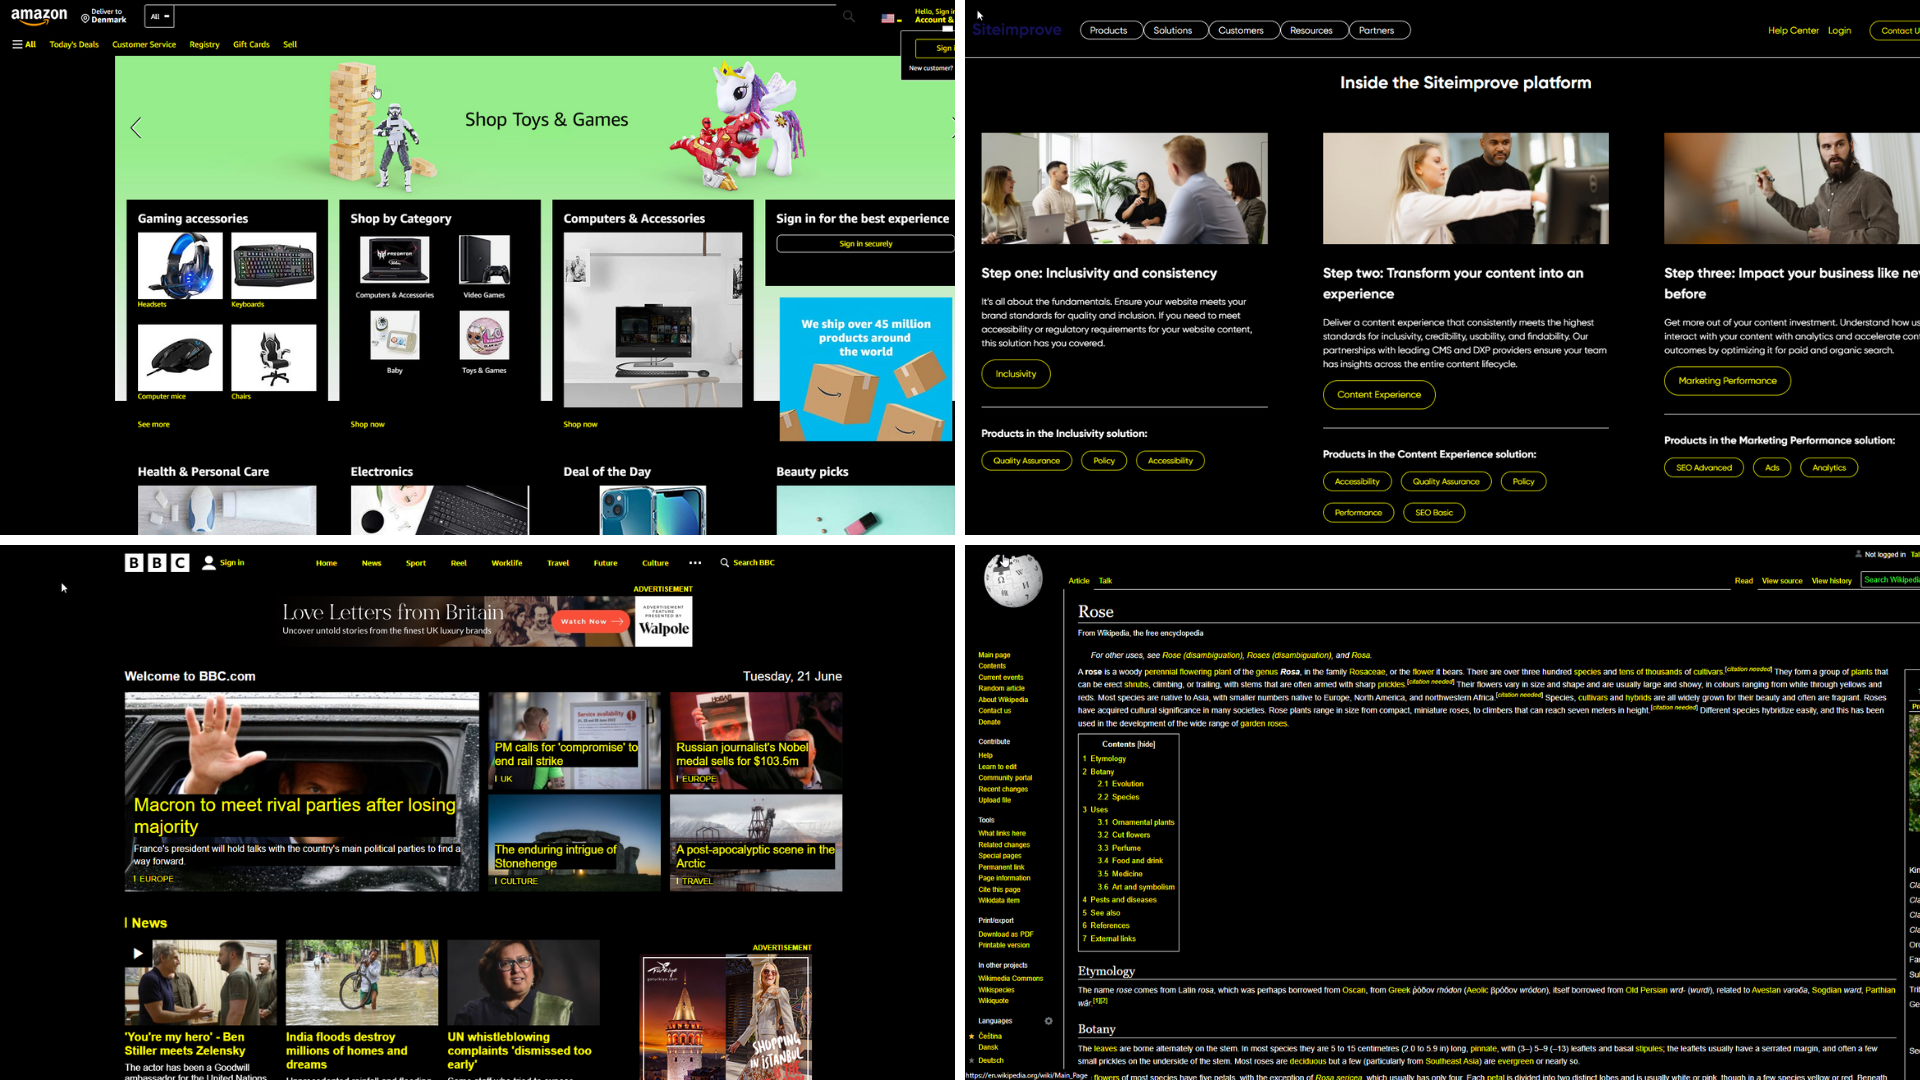 A series of four websites in high contrast mode: Amazon, the Siteimprove website, the BBC News, and Wikipedia. All websites have a black background, with high and right yellow text. 